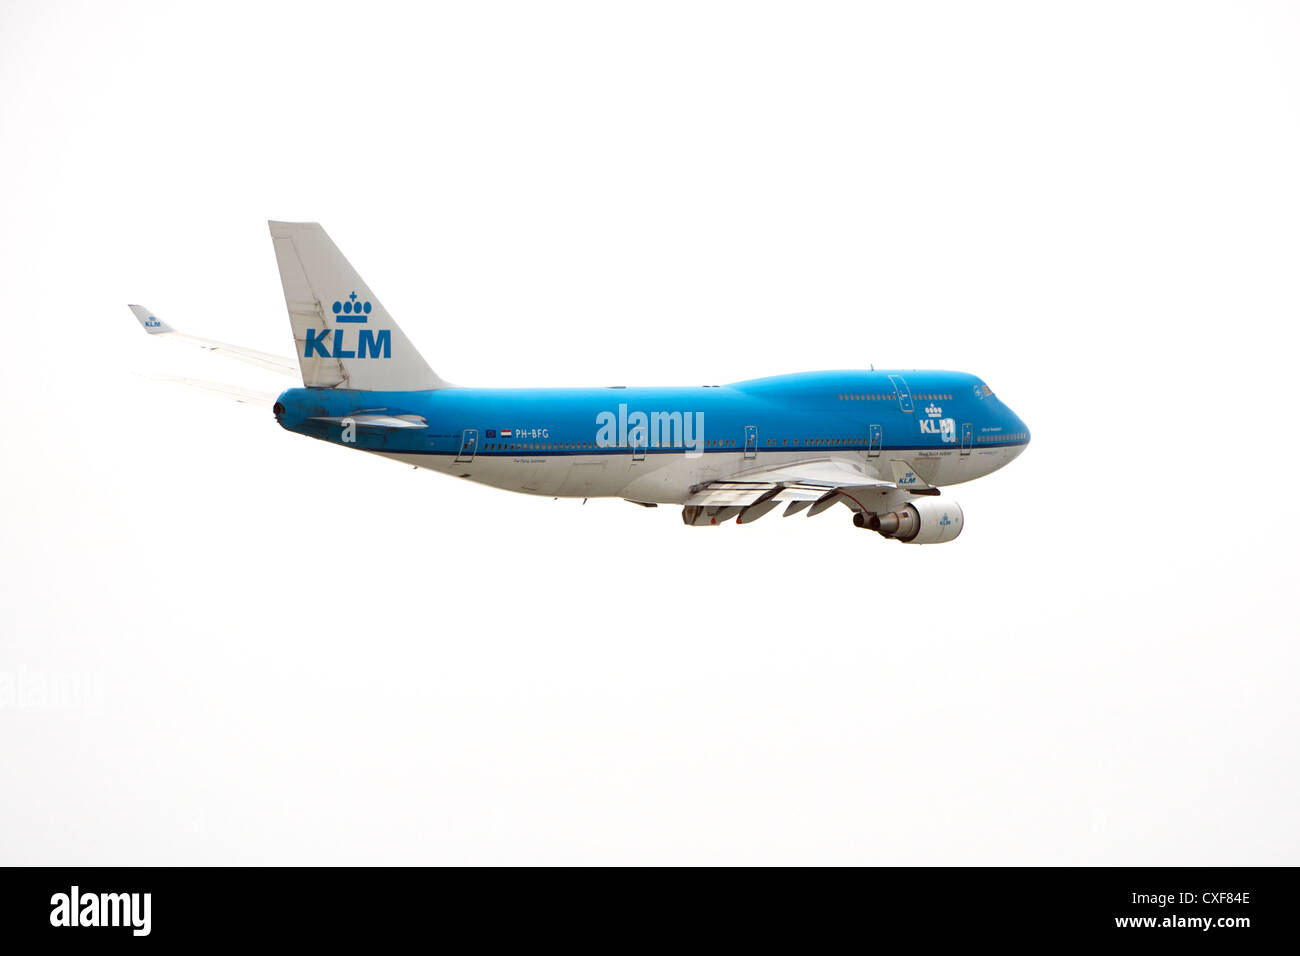 KLM - The Flying Dutchman - Boing 747 in flight after takeoff from Sint Maarten. Stock Photo